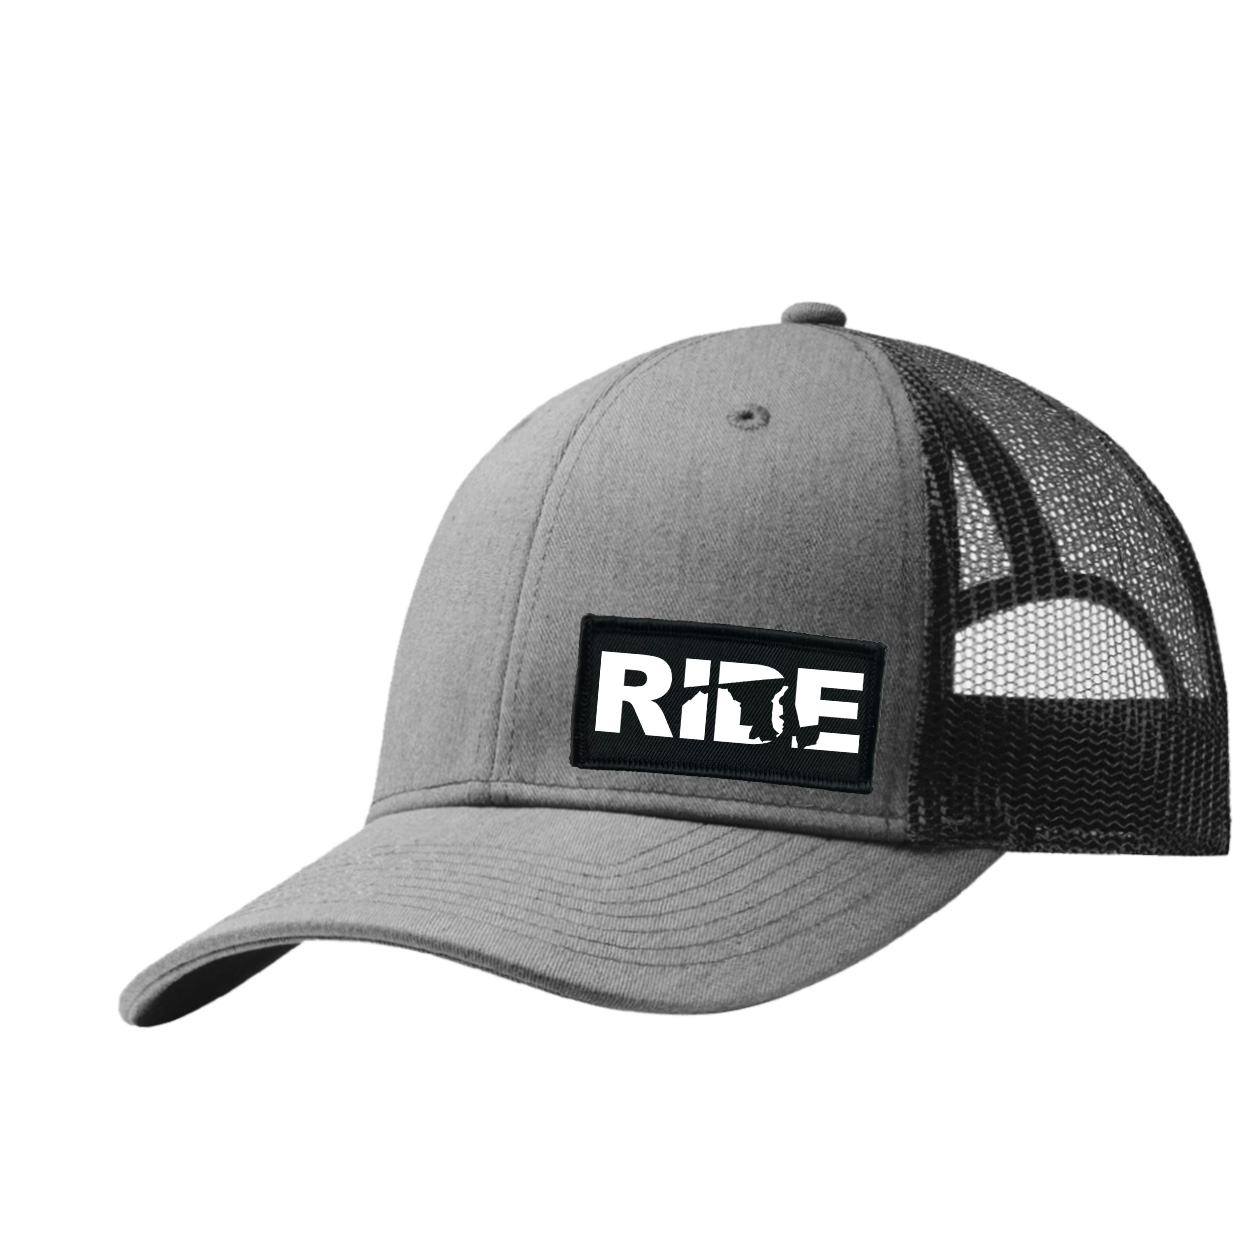 Ride Maryland Night Out Woven Patch Snapback Trucker Hat Heather Gray/Black (White Logo)